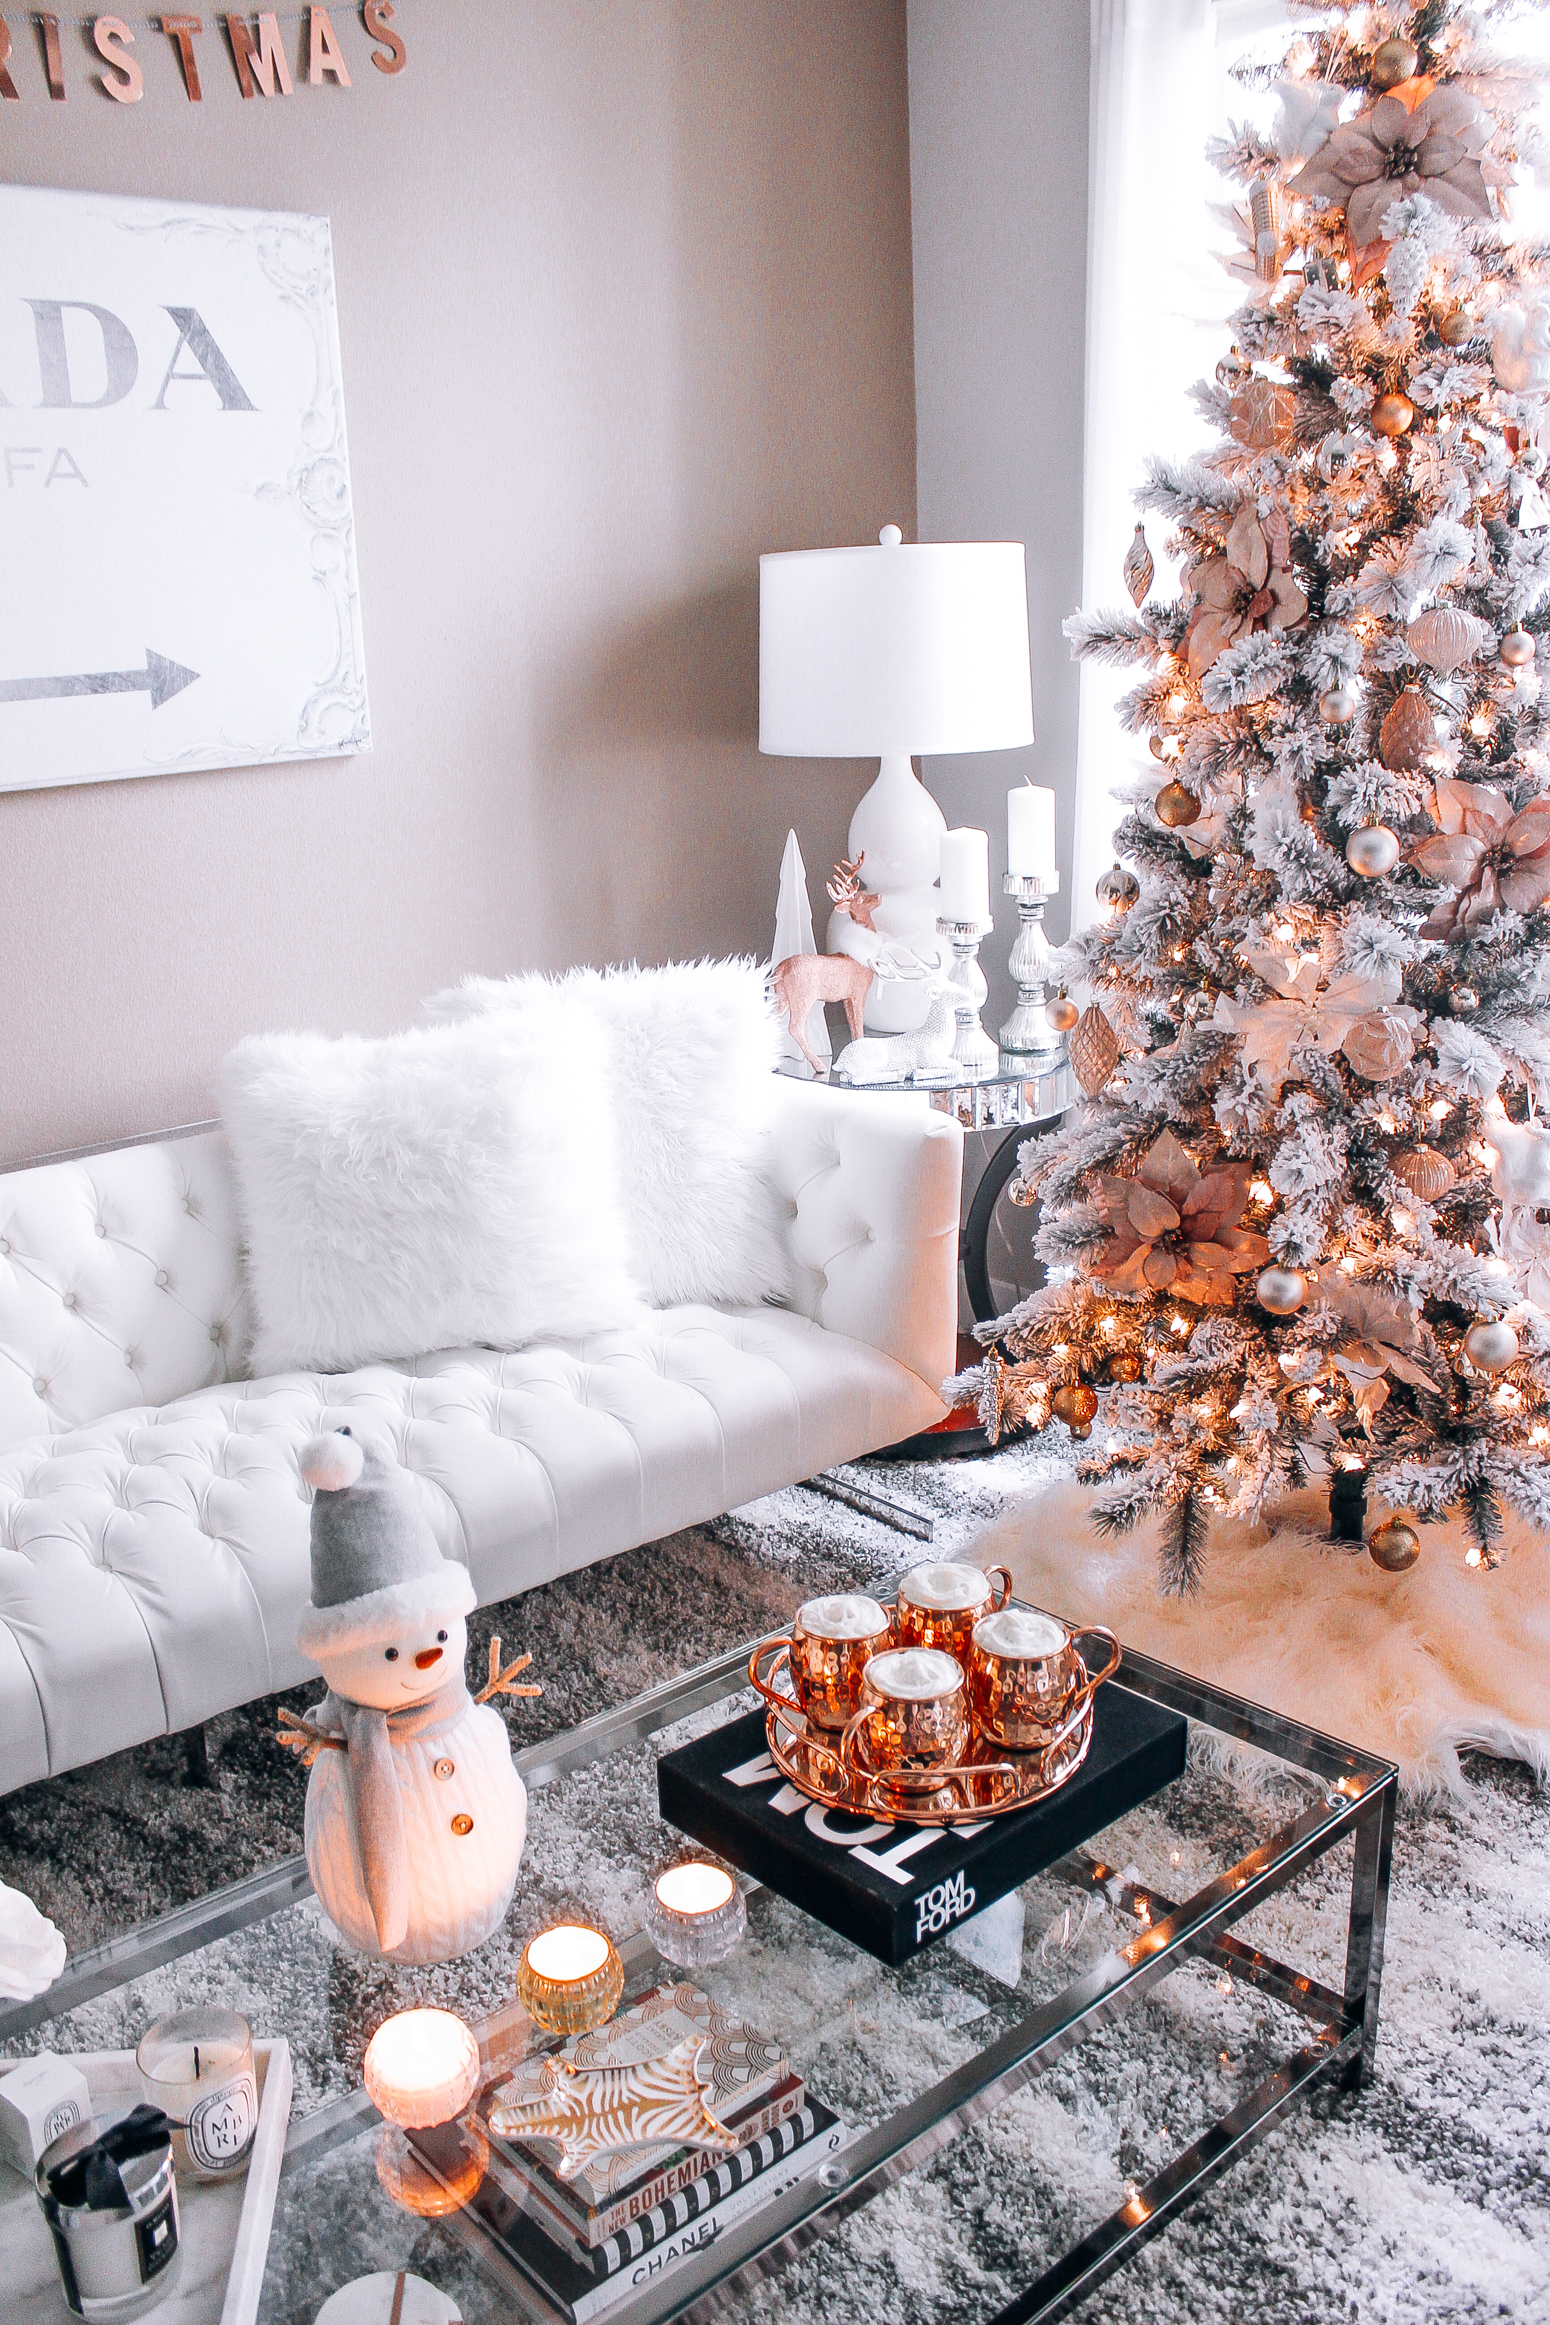 Christmas Decor | Blondie in the City | Pink & Rose Gold Christmas Decor | Hot Chocolate in Moscow Mules